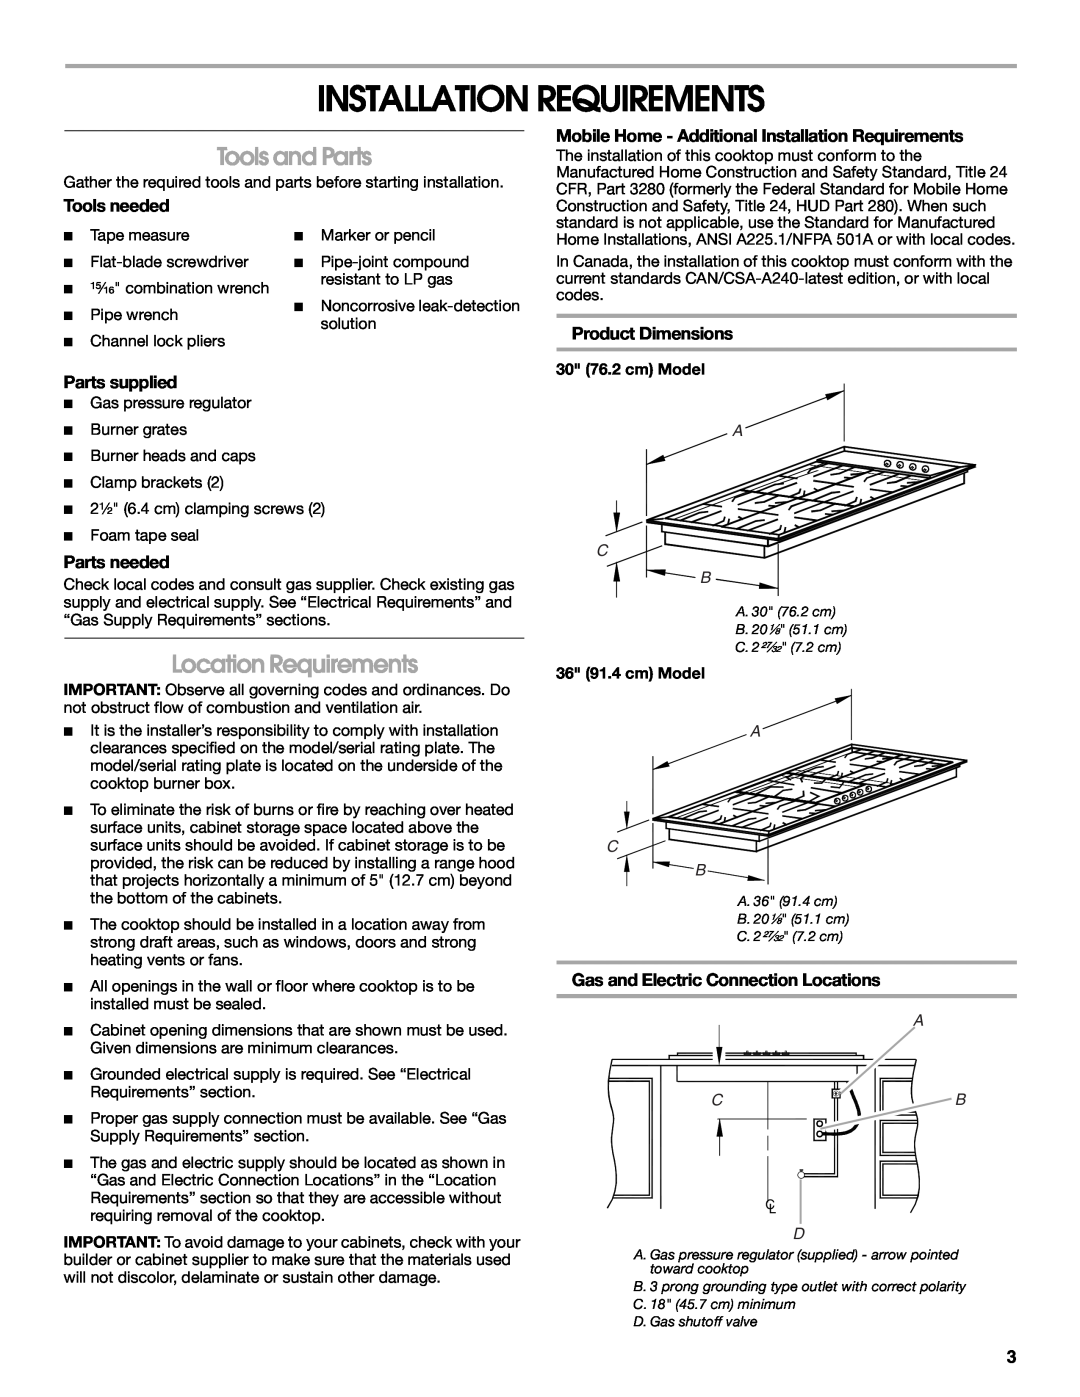 Whirlpool 9761893B Installation Requirements, Tools and Parts, Location Requirements, Tools needed, Parts supplied, A C B 